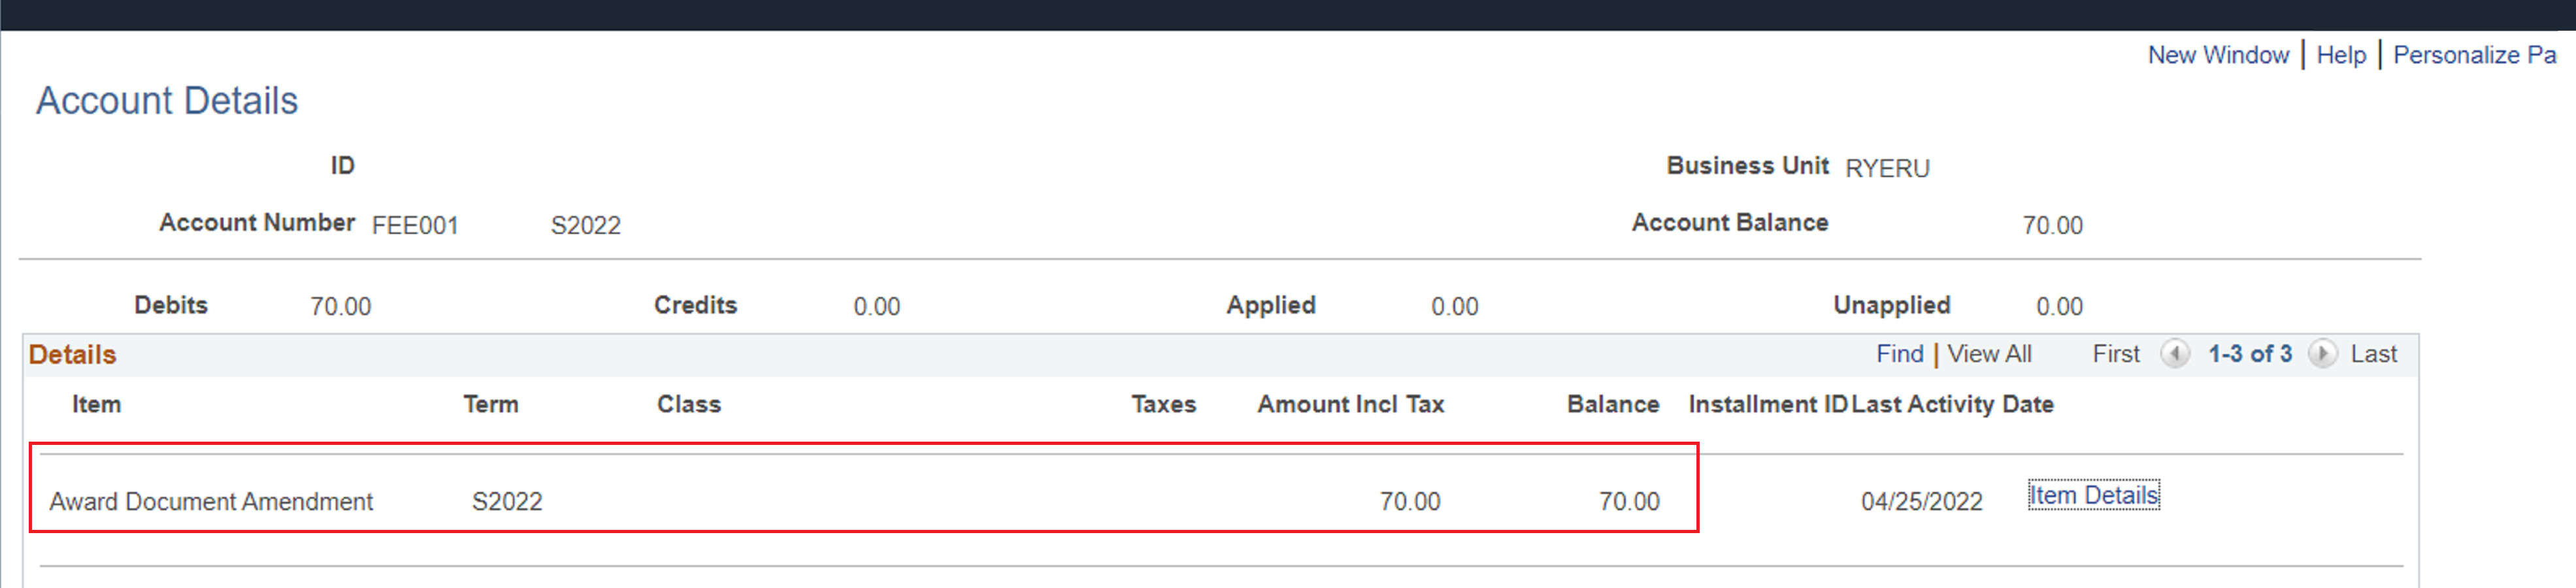 Account Inquiry section in RAMSS displaying details of a successful transaction